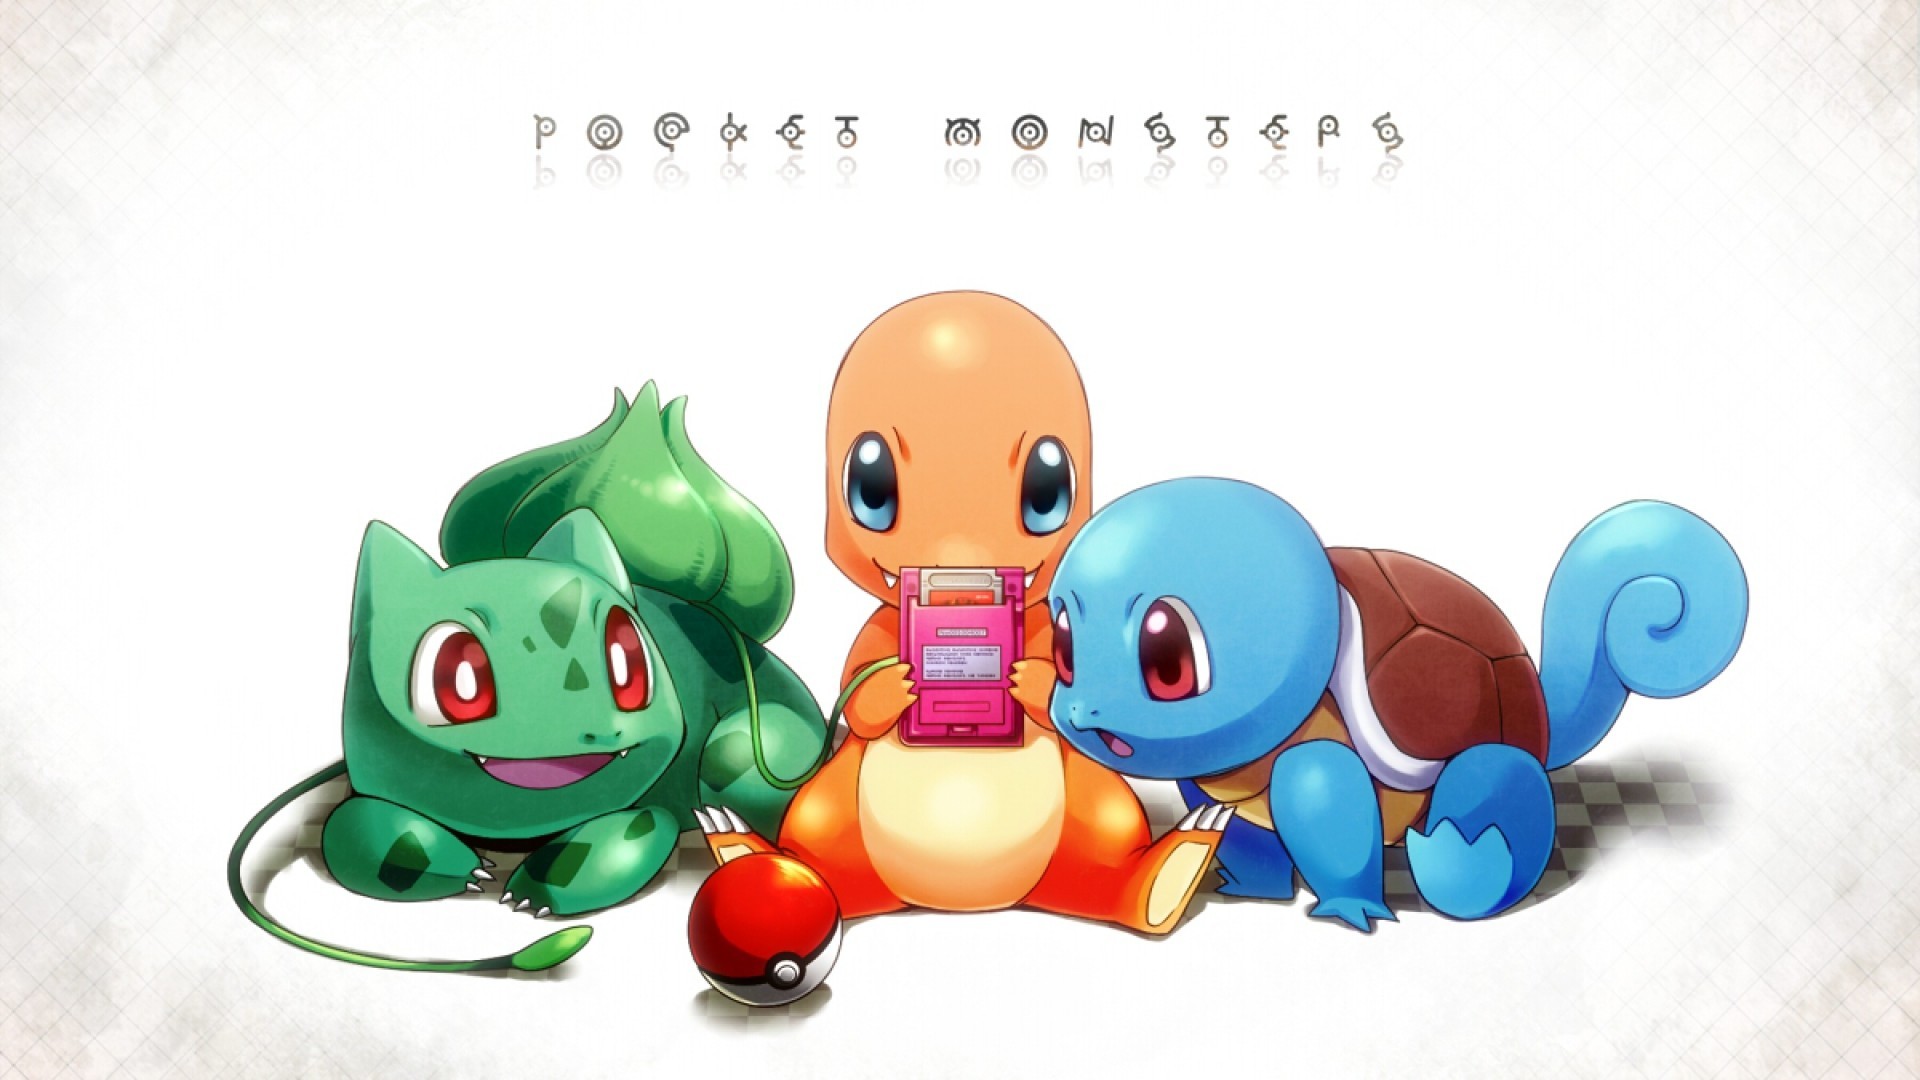 General 1920x1080 anime simple background white background Pokémon video games